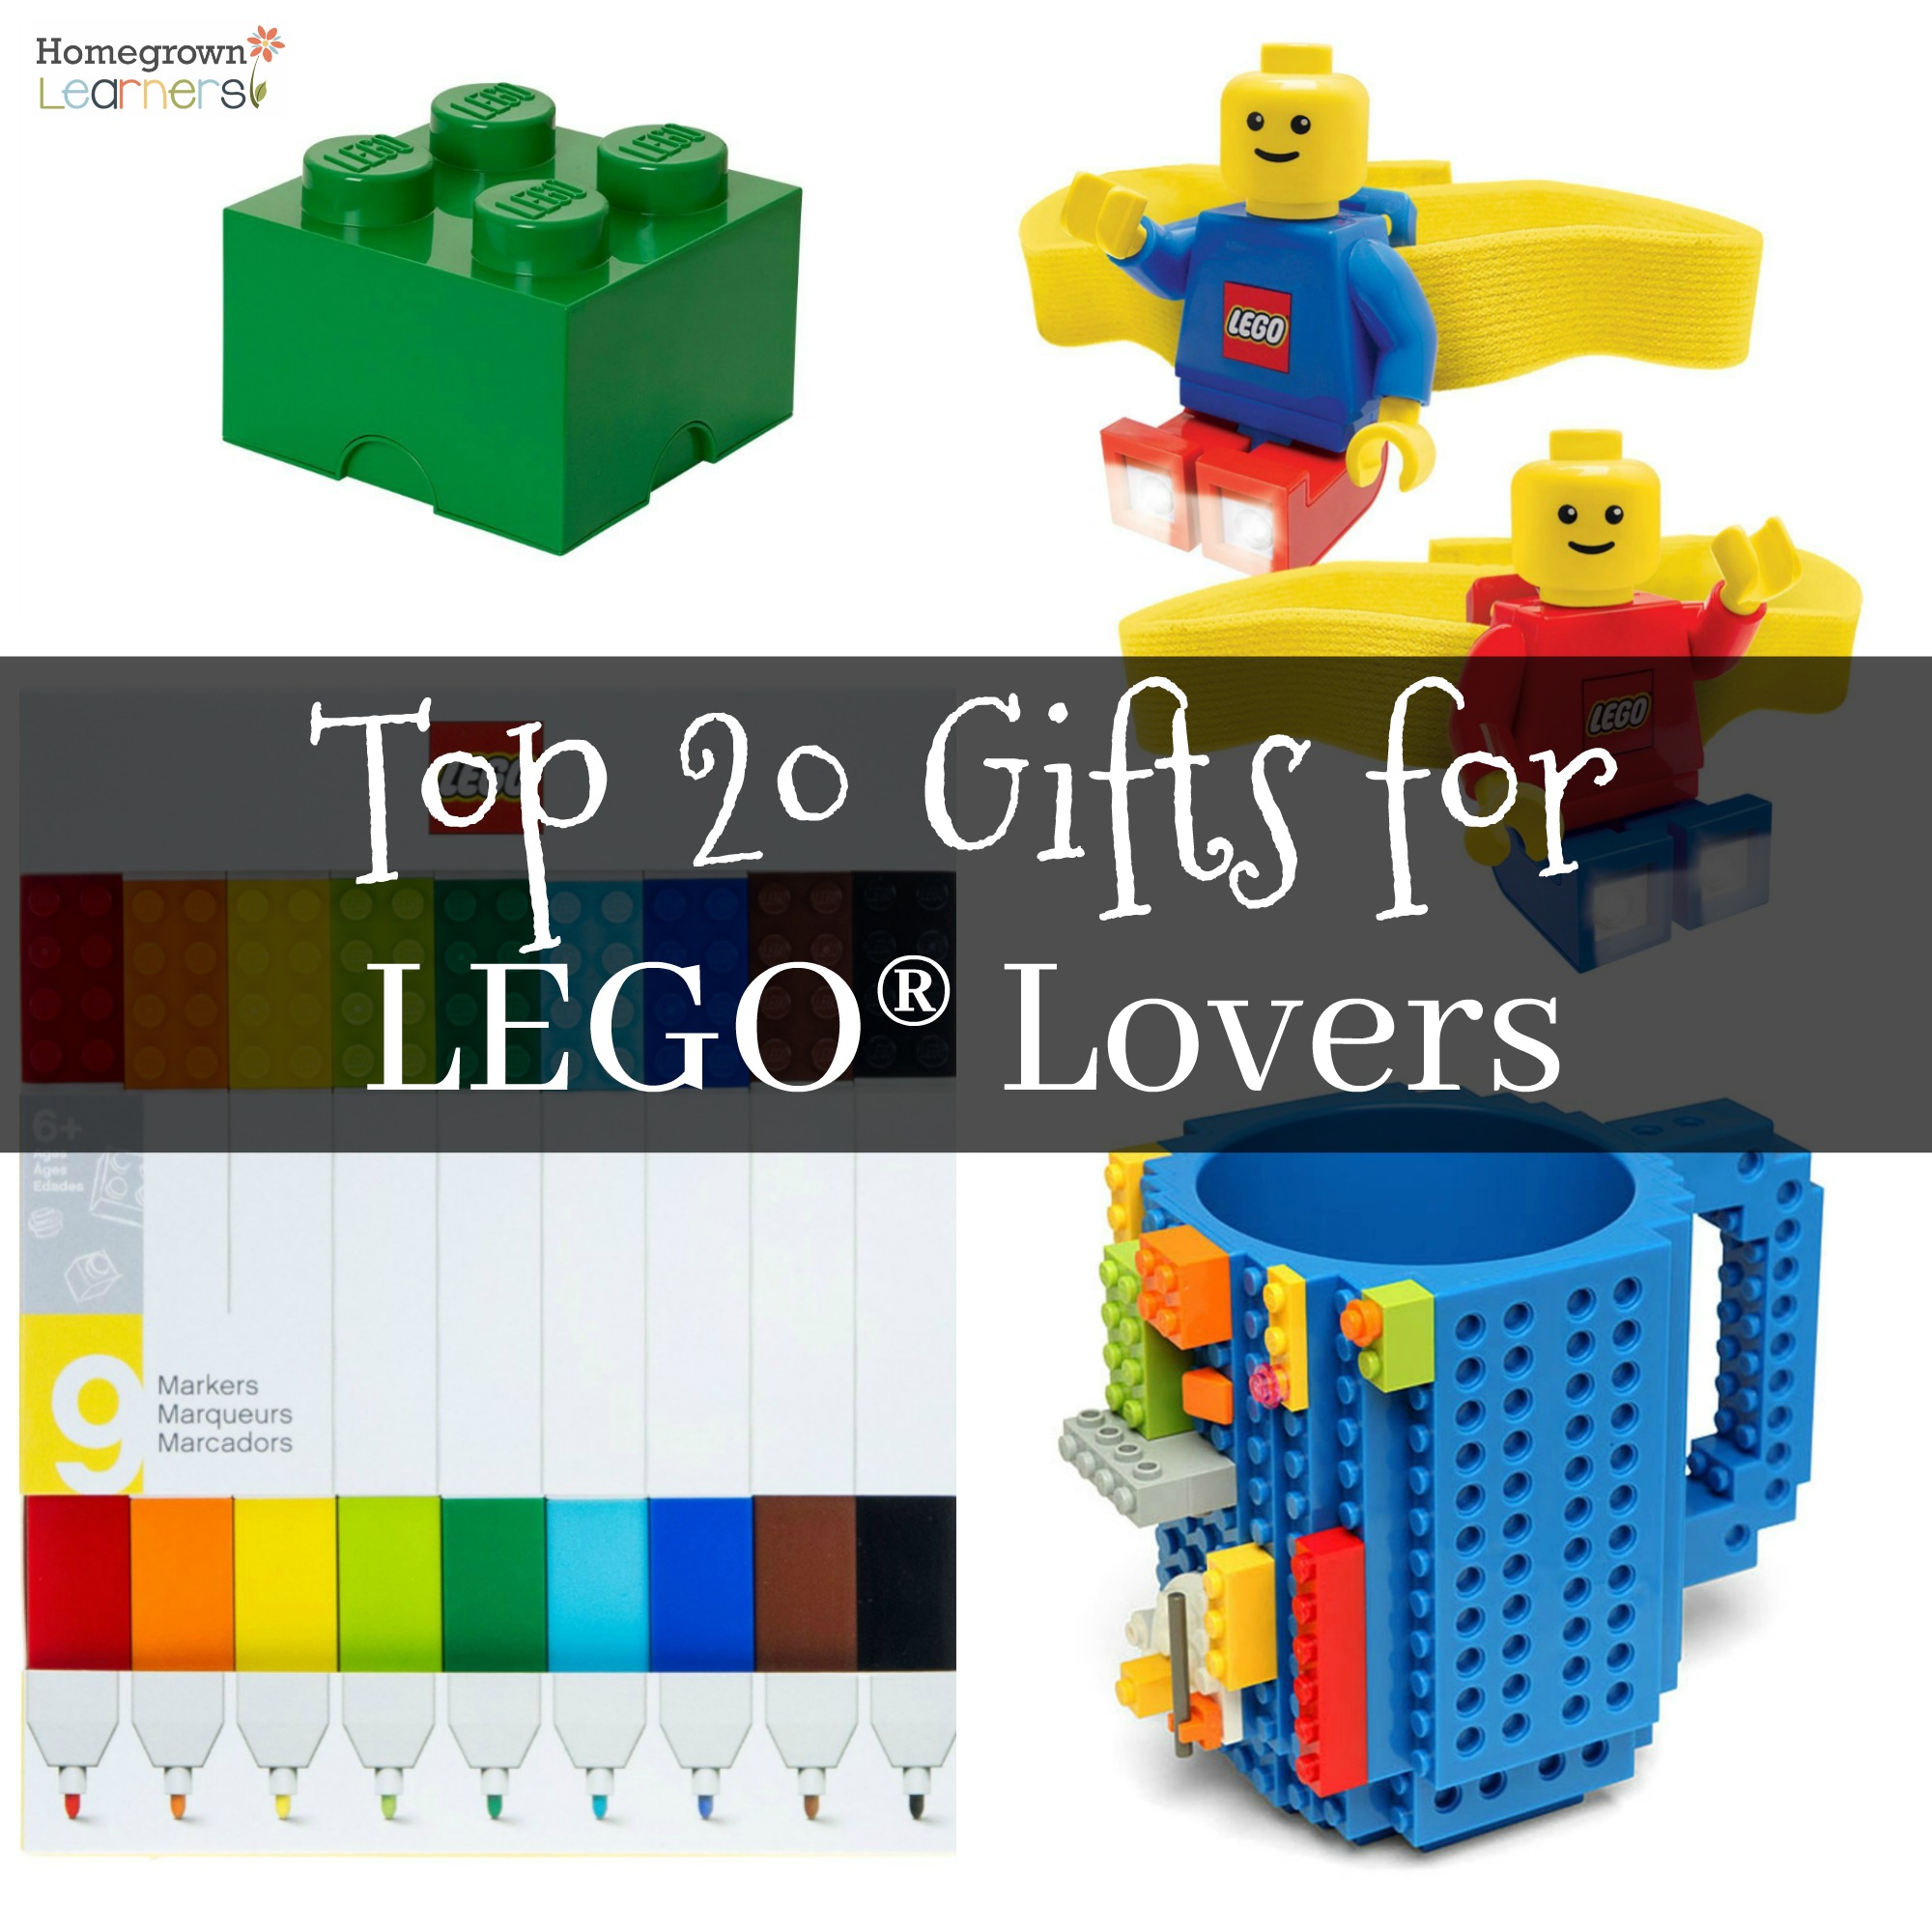 Top 20 Gifts for LEGO Lovers